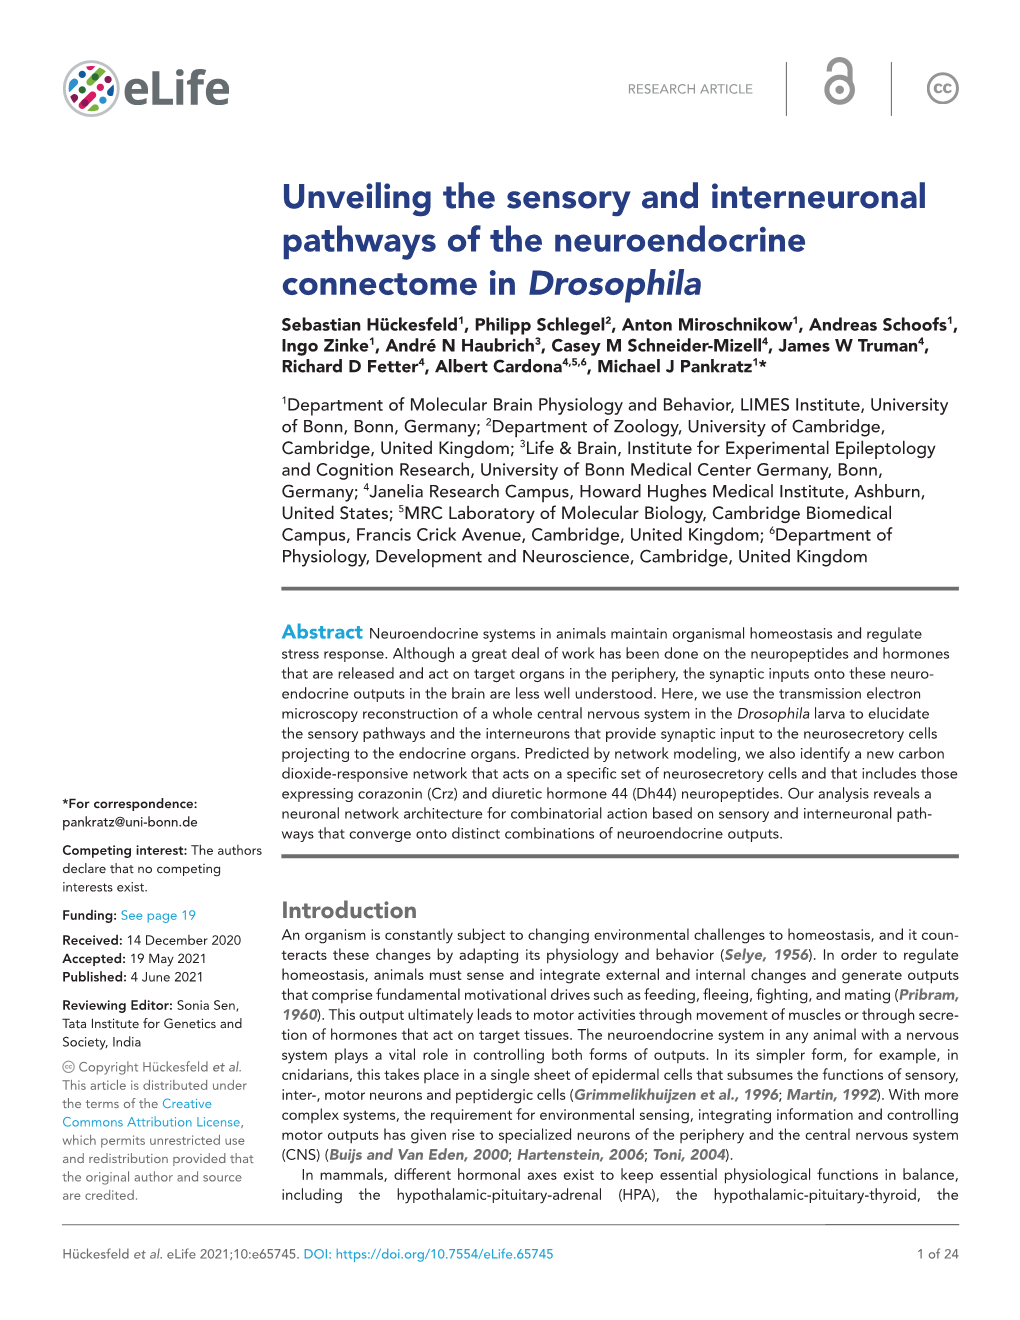 Unveiling the Sensory and Interneuronal Pathways of The